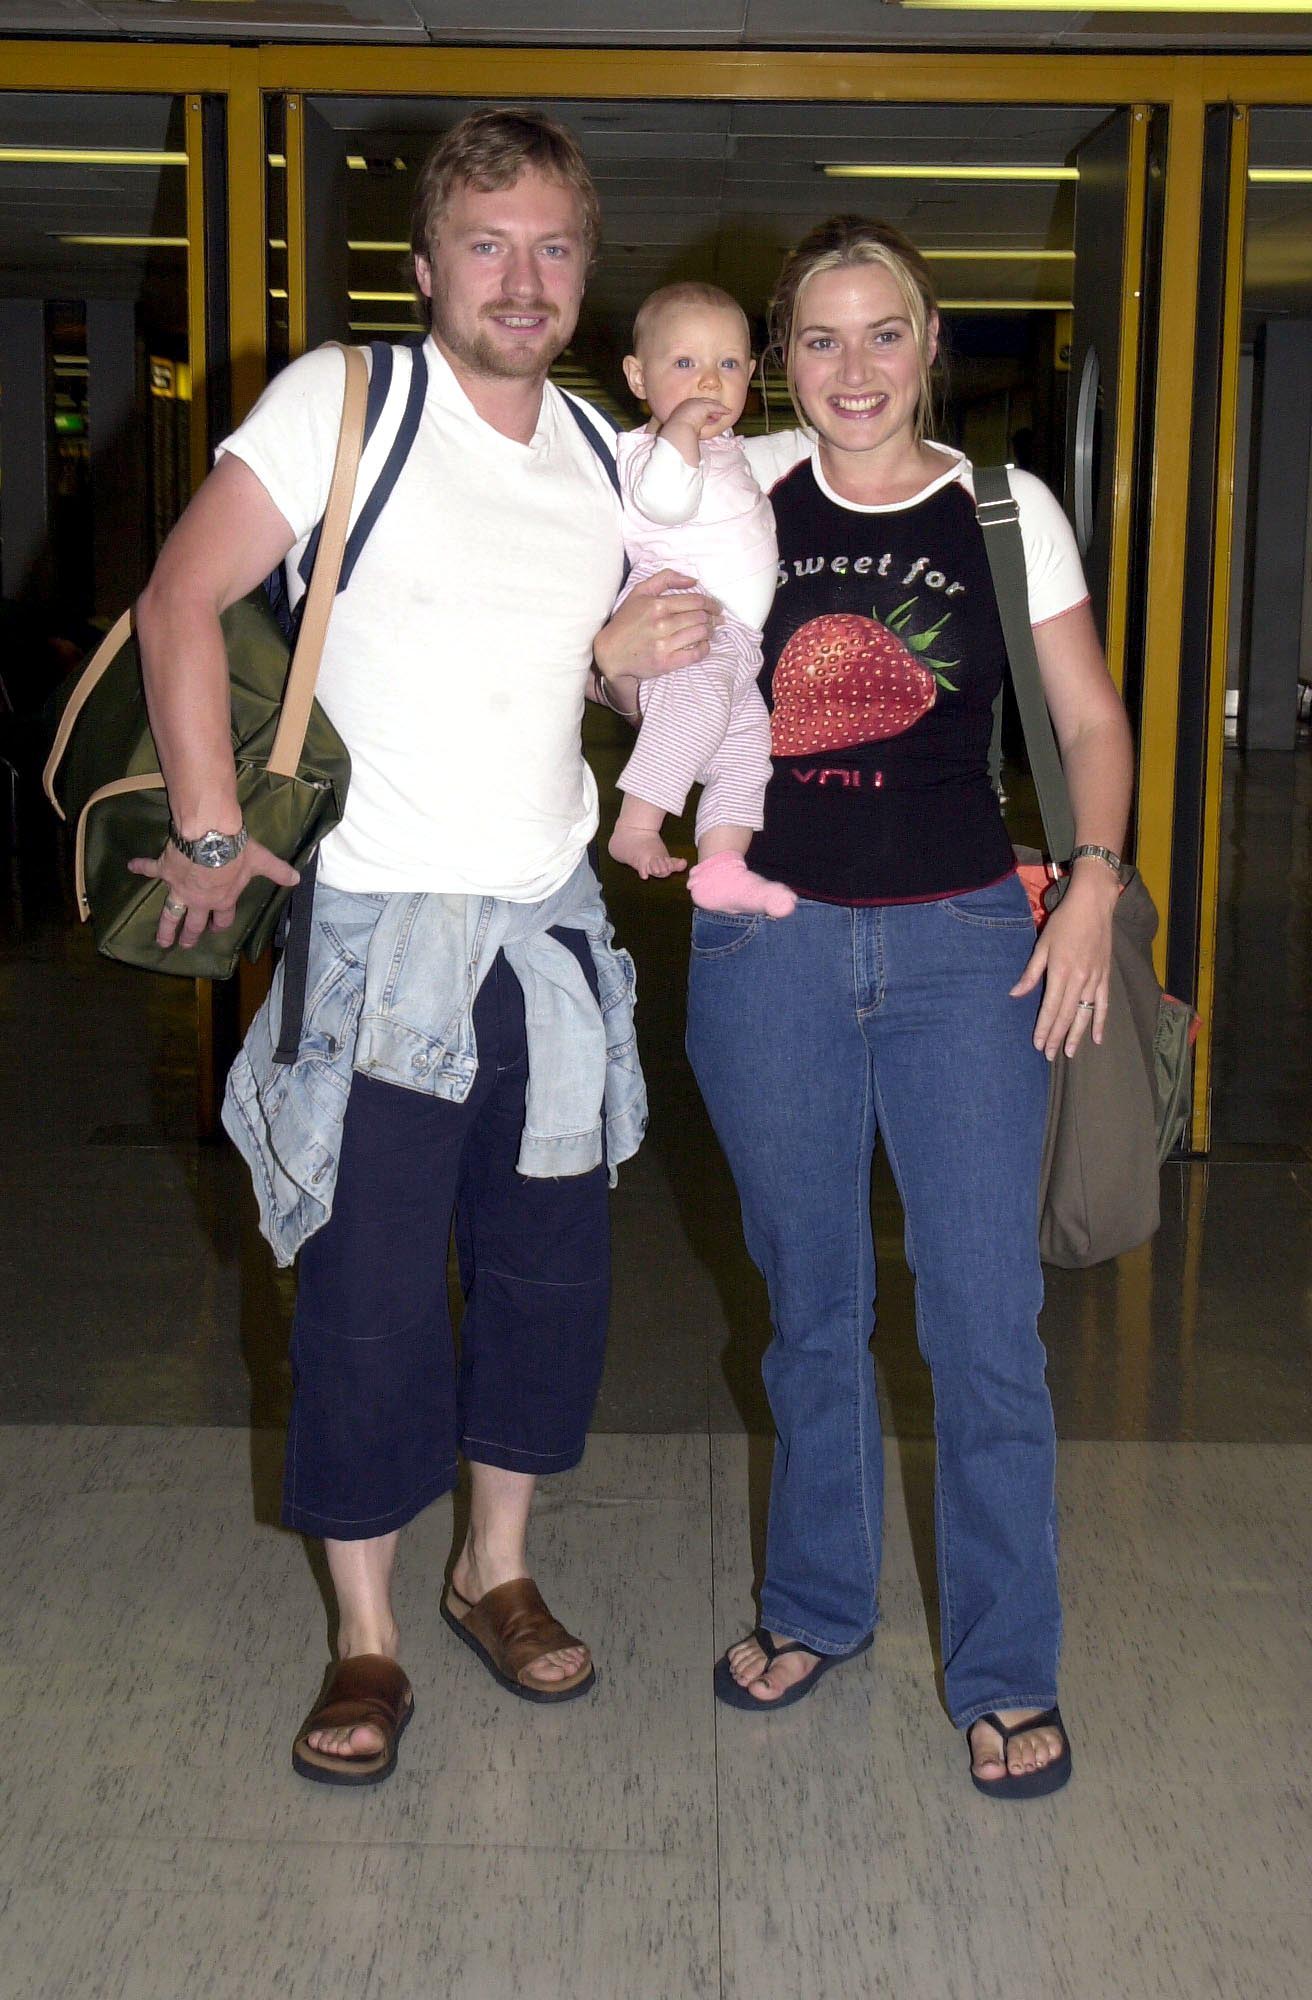 <p><span>Oscar-winning actress <a href="https://www.wonderwall.com/celebrity/profiles/overview/kate-winslet-330.article">Kate Winslet</a> and first husband Jim Threapleton, a director, were photographed with infant daughter Mia Threapleton at Heathrow Airport in London in June 2001. Keep reading to see Mia -- who's now an actress like her mom -- at 22...</span></p>